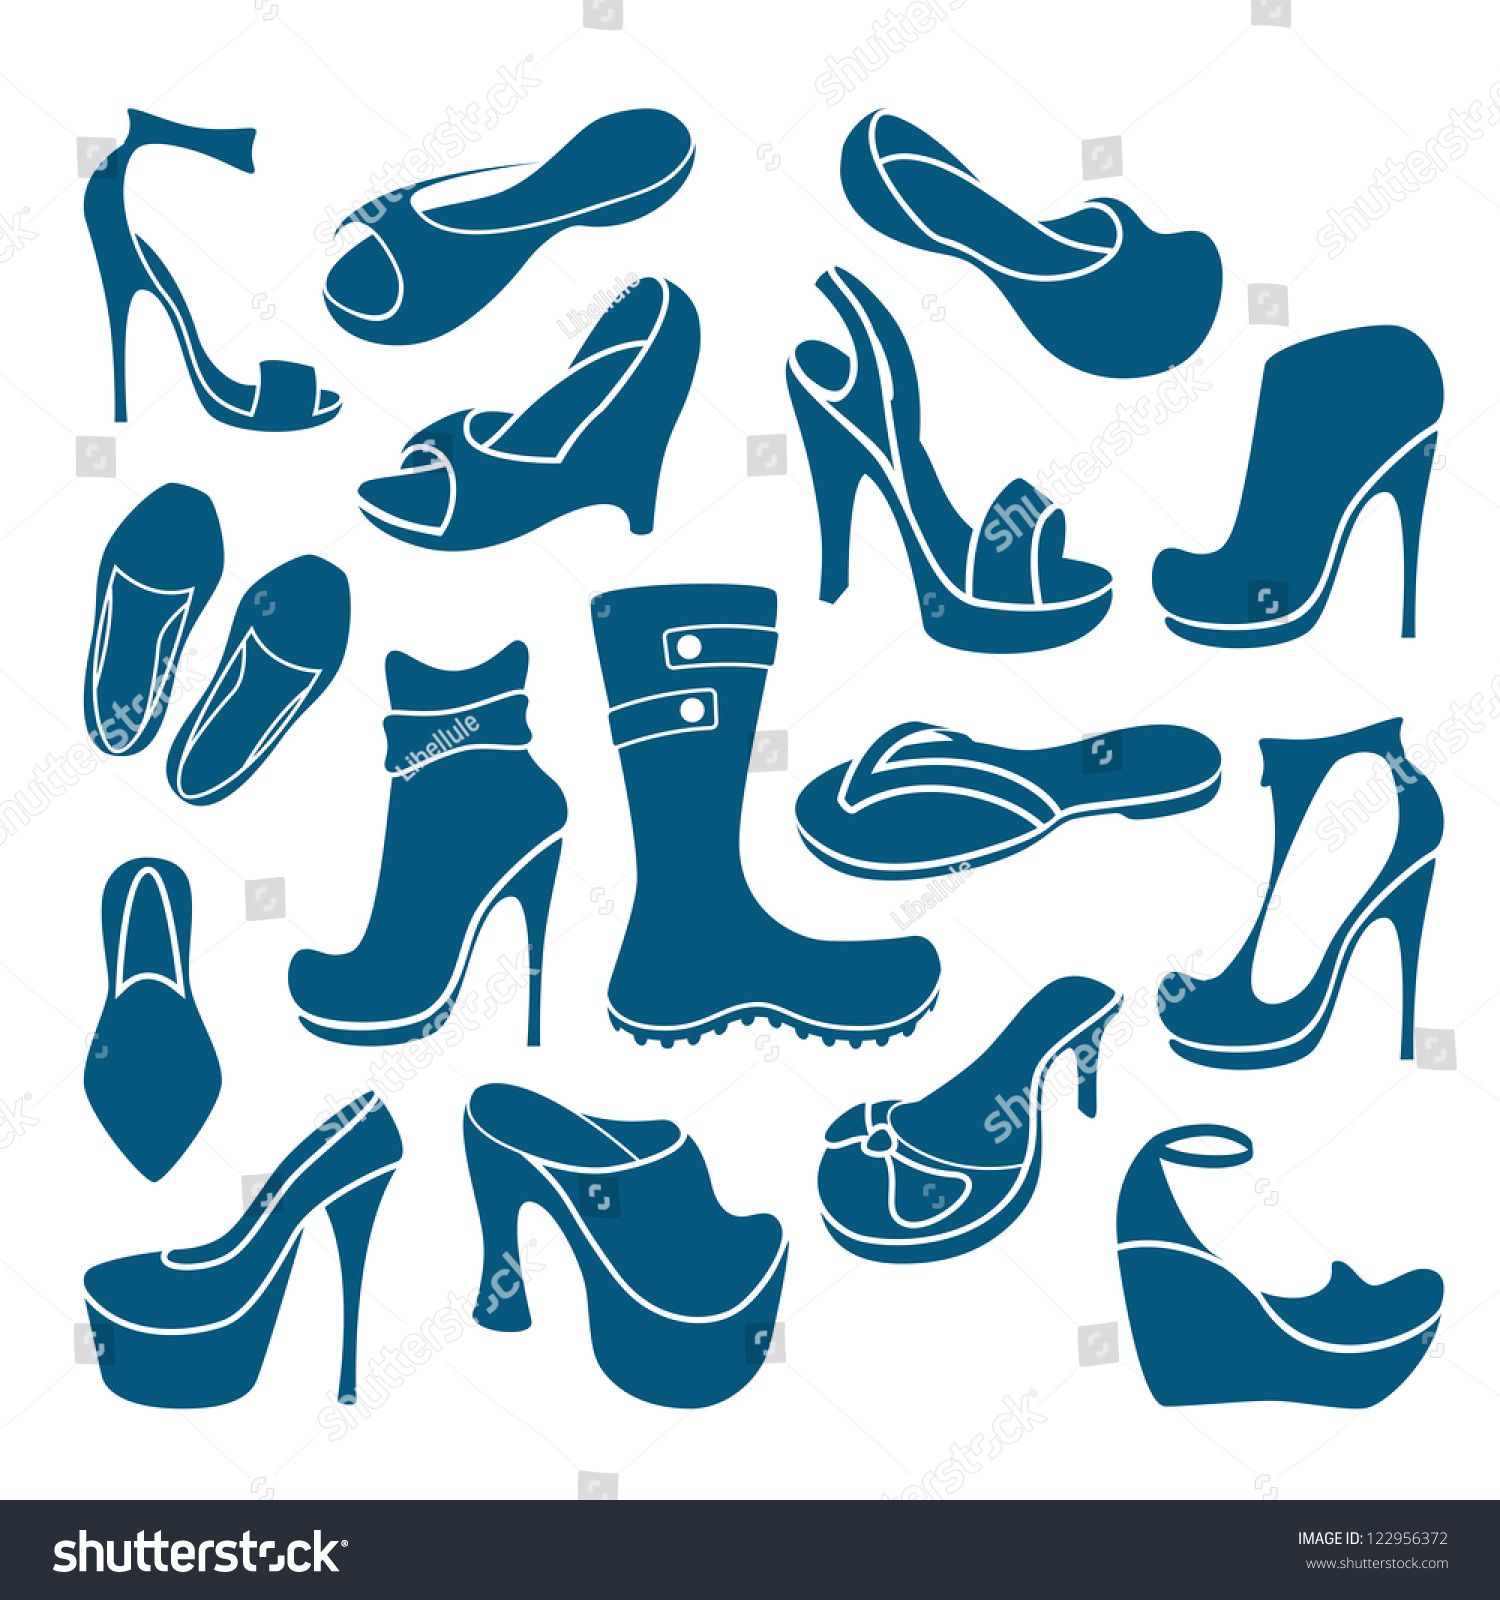 Footwear graphical icons collection #122956372